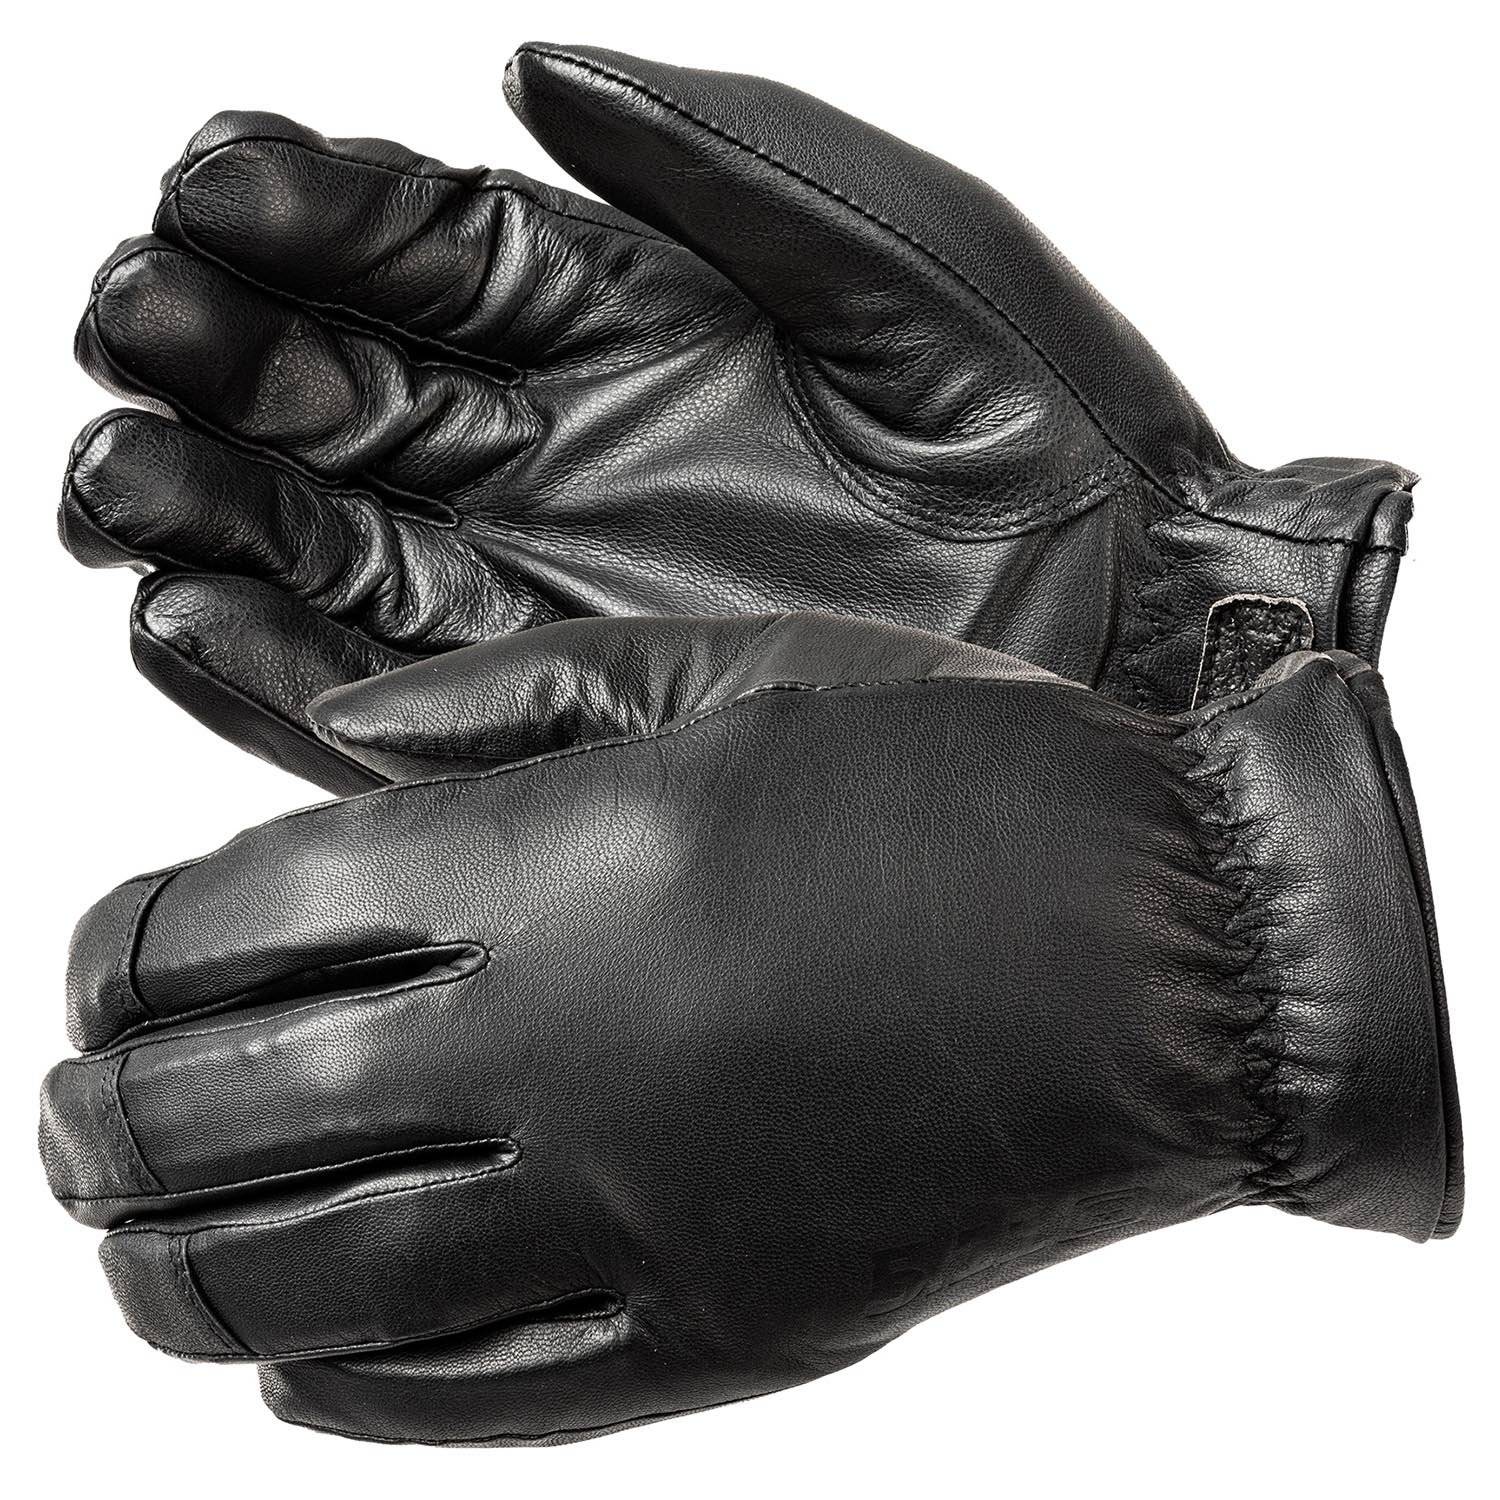 5.11 Tactical Patrol CR Insulated Gloves